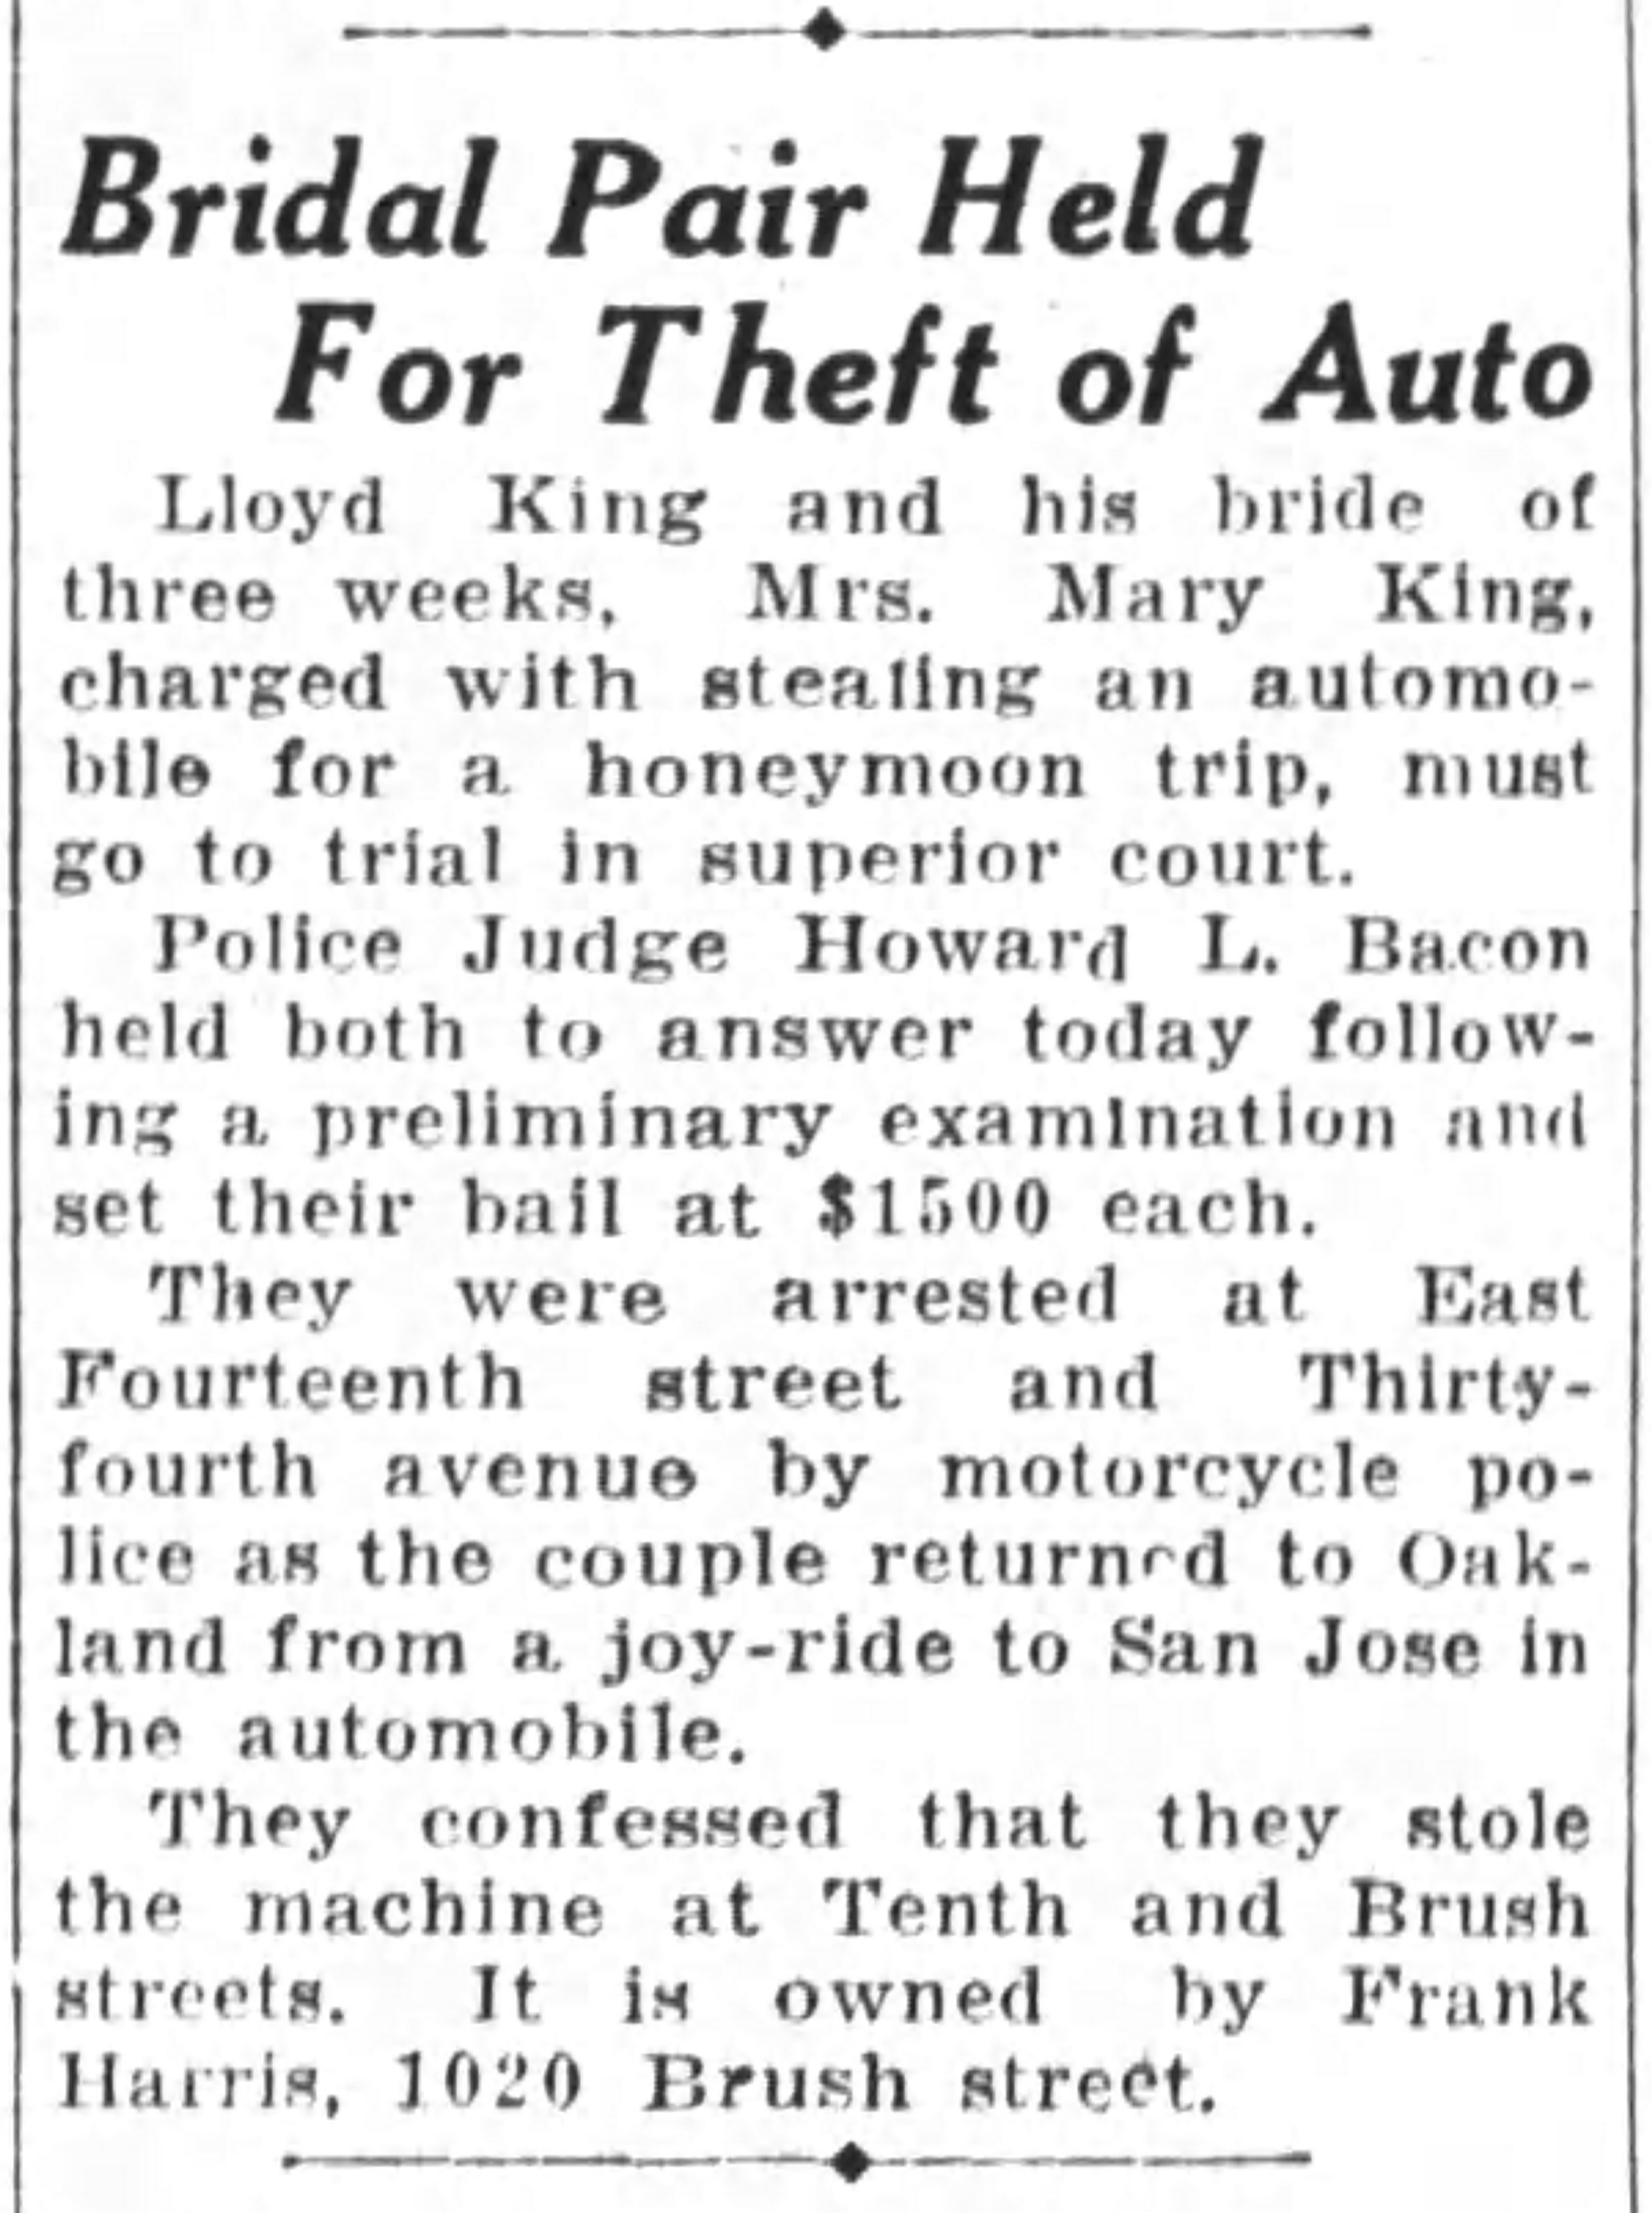 Article about Lloyd and Mary King stealing a car on their honeymoon